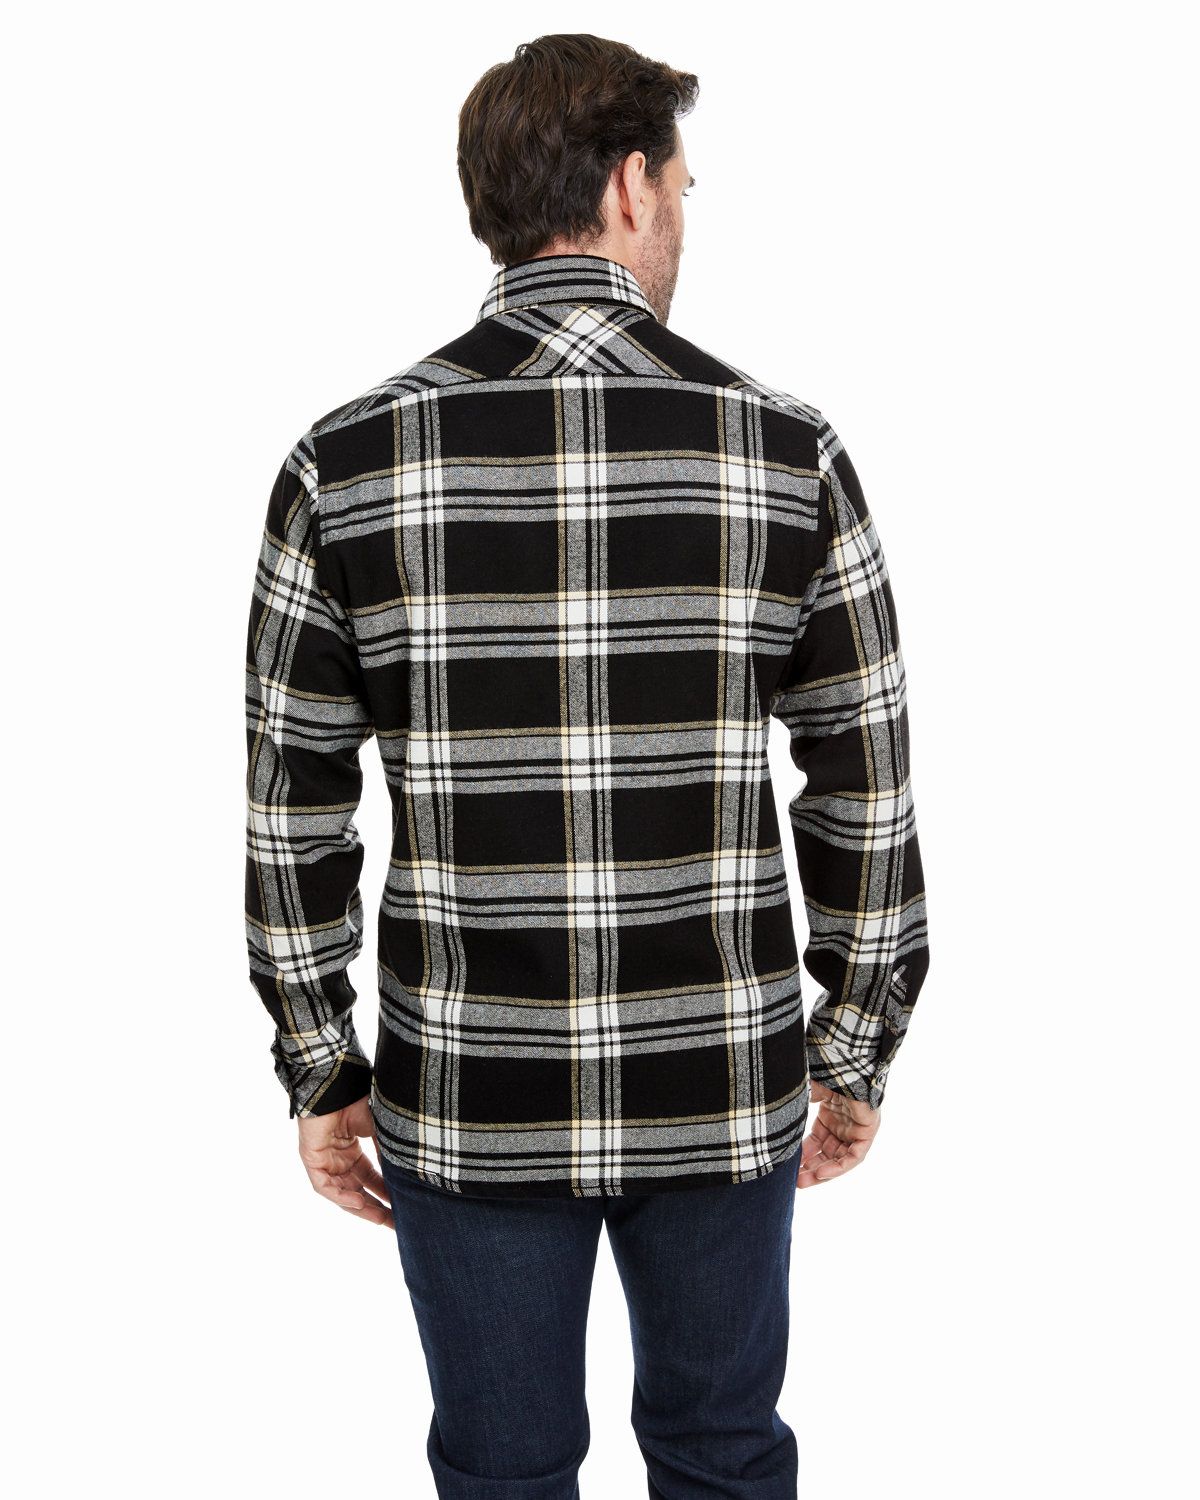 'Burnside B8212 Woven Plaid Flannel With Biased Pocket'